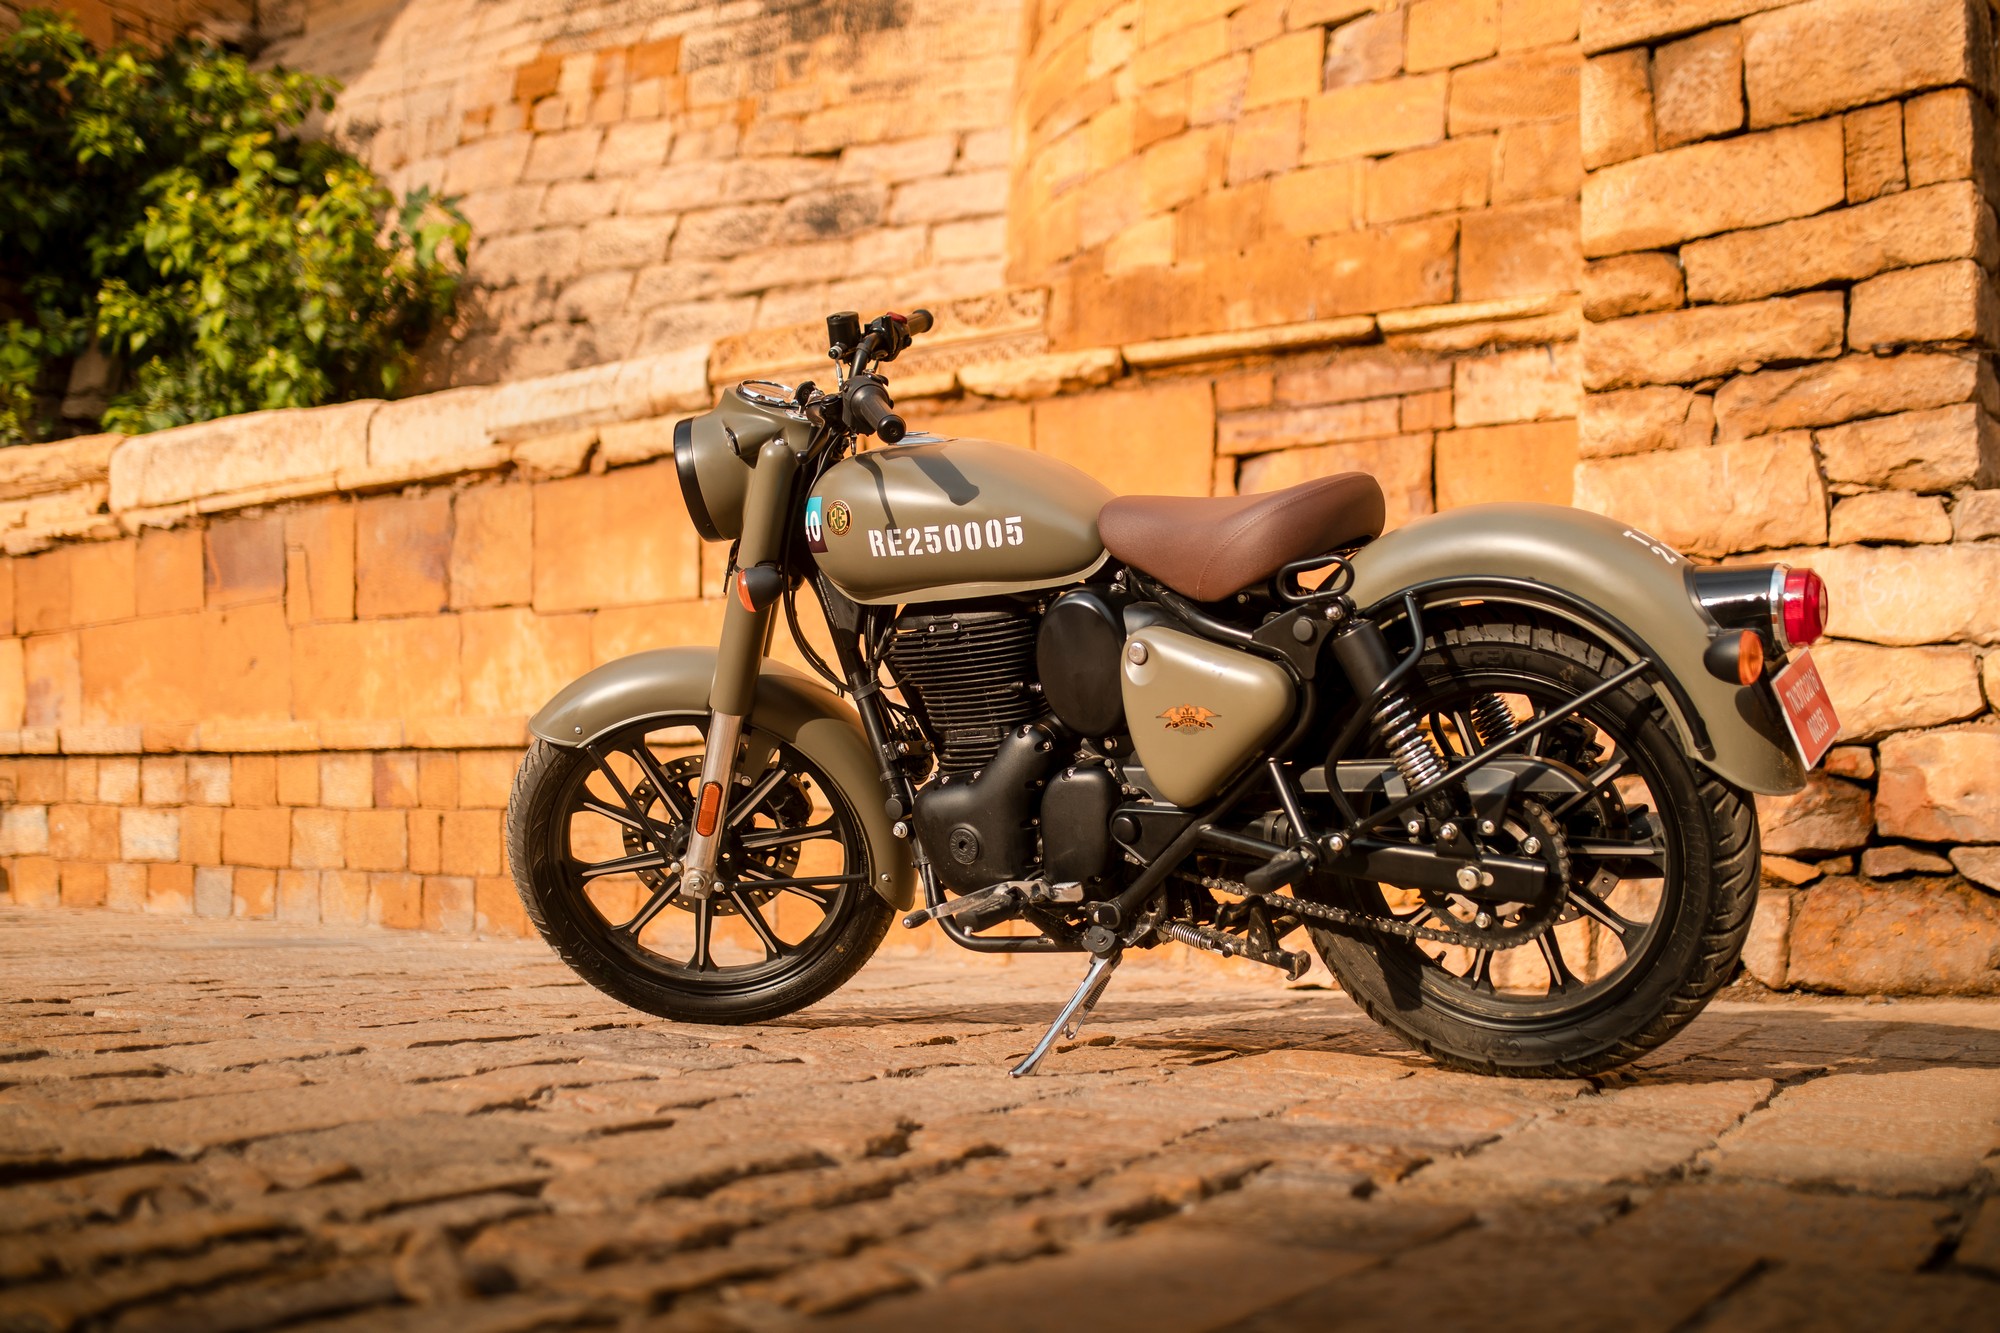 Legend Reborn: Here's the new Royal Enfield Classic 350 - xBhp.com ...